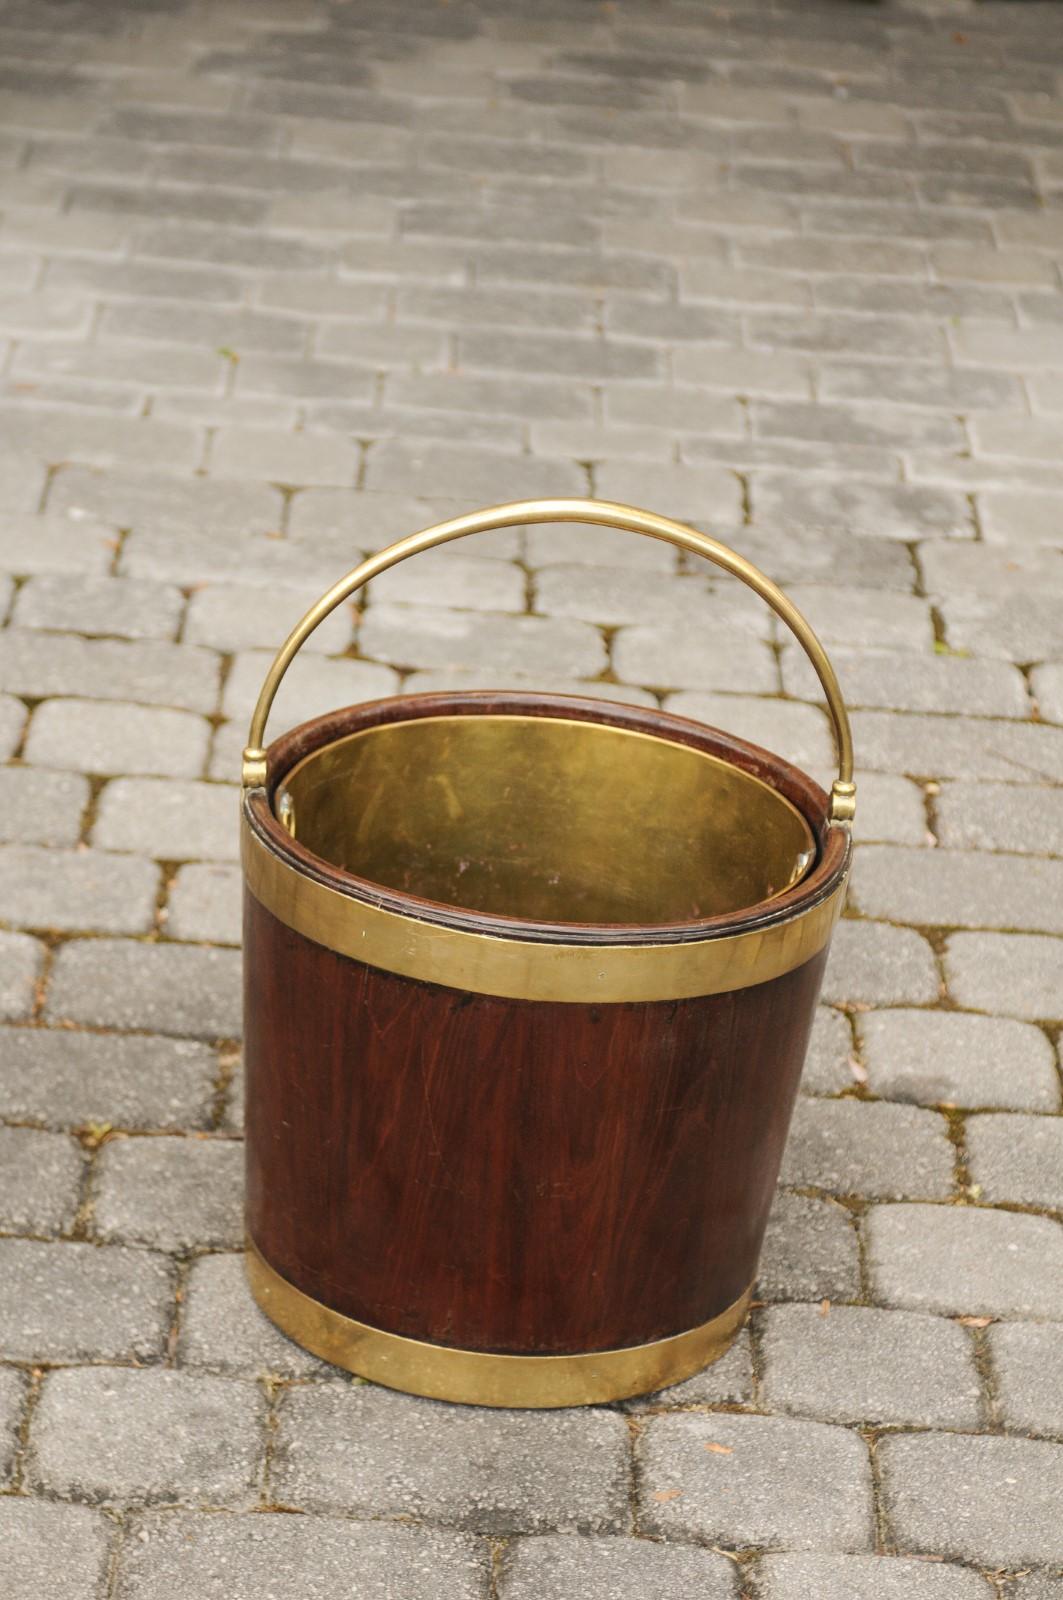 An English Regency mahogany bucket from the early 19th century, with brass accents and handle. Born in England during the second quarter of the 19th century, this elegant mahogany bucket features a removable brass liner. Topped with a large handle